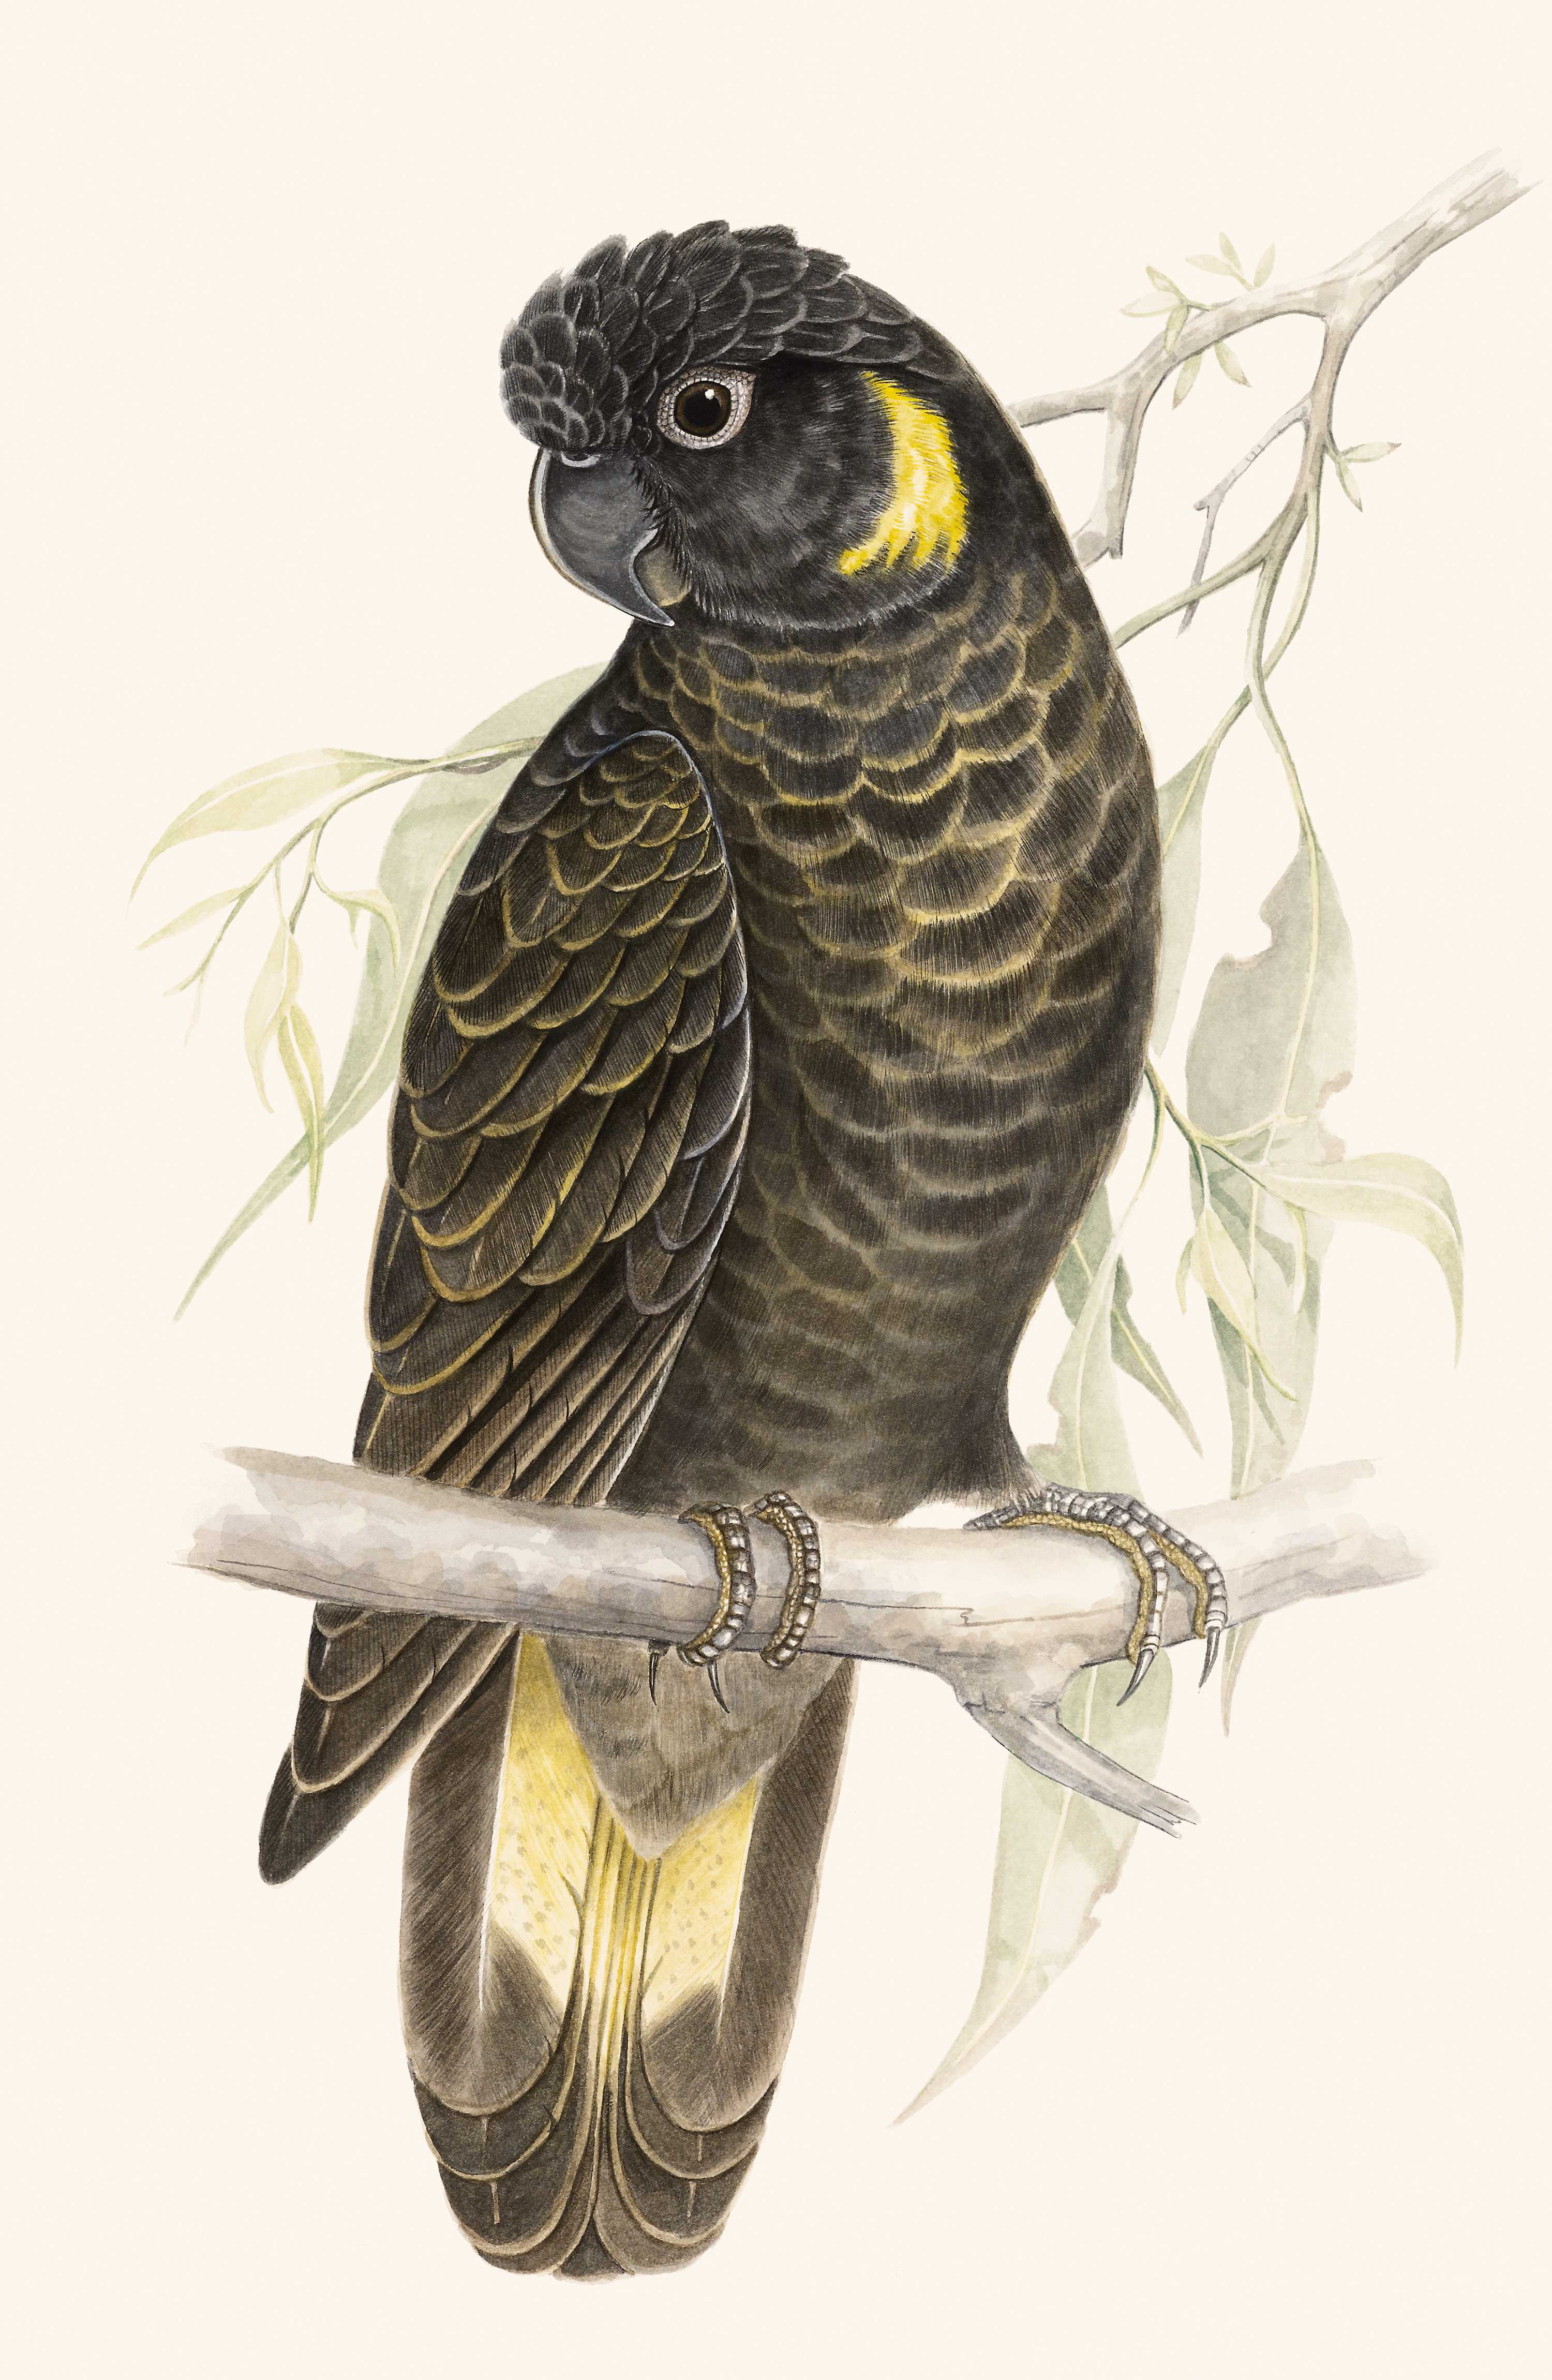 An image of the Yellow-tailed Black Cockatoo watercolour by Susan Lester.